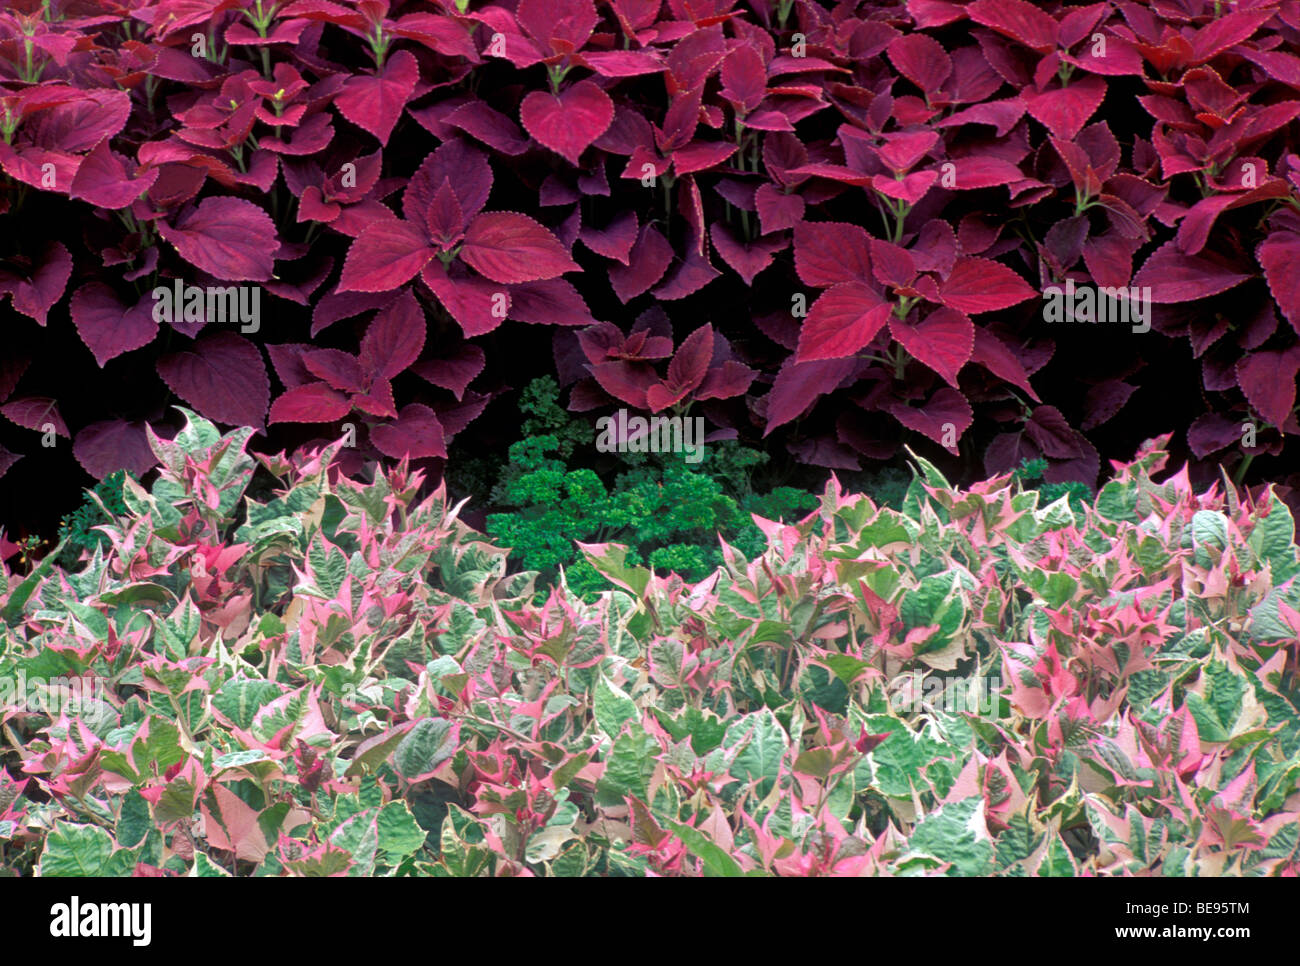 Unique garden border of pinks and reds using coleus and sweet potato, Midwest USA Stock Photo